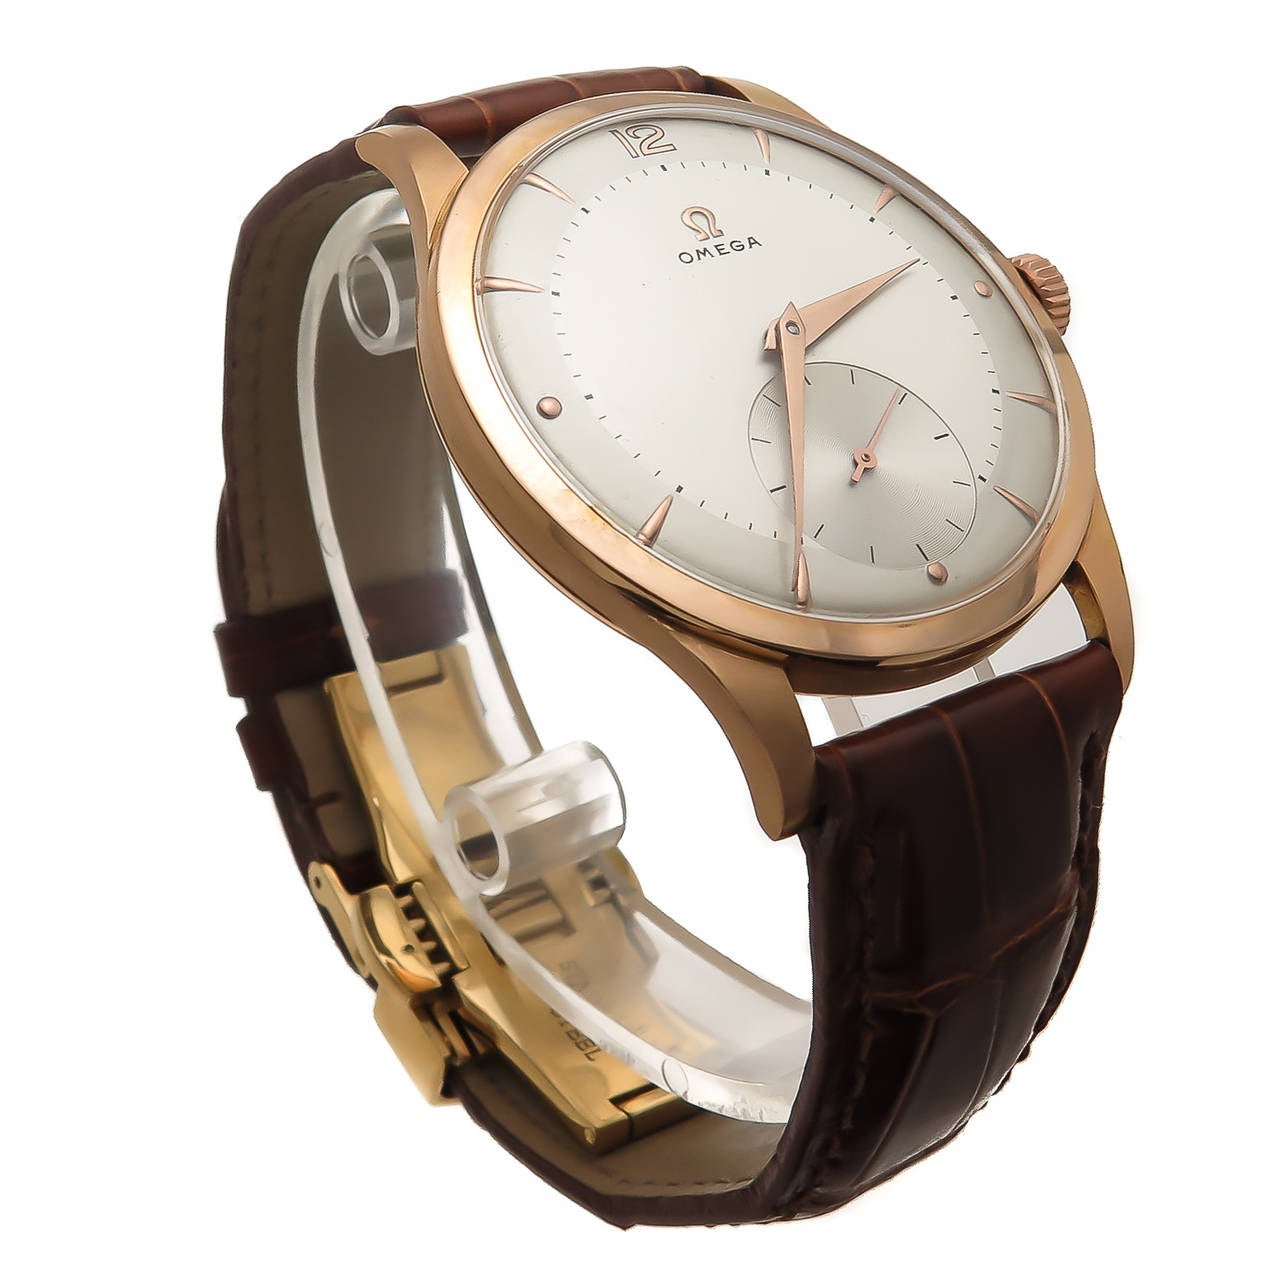 Circa 1940s Omega 18K Rose Gold Wrist Watch, 36 M.M. 3 Piece case, Manual wind 15 Jewel Caliber 265 Movement. Silvered Dial with Rose Gold markers and Hands. Brown Alligator Strap with Gold Plated Deployment clasp. This case is correct for the